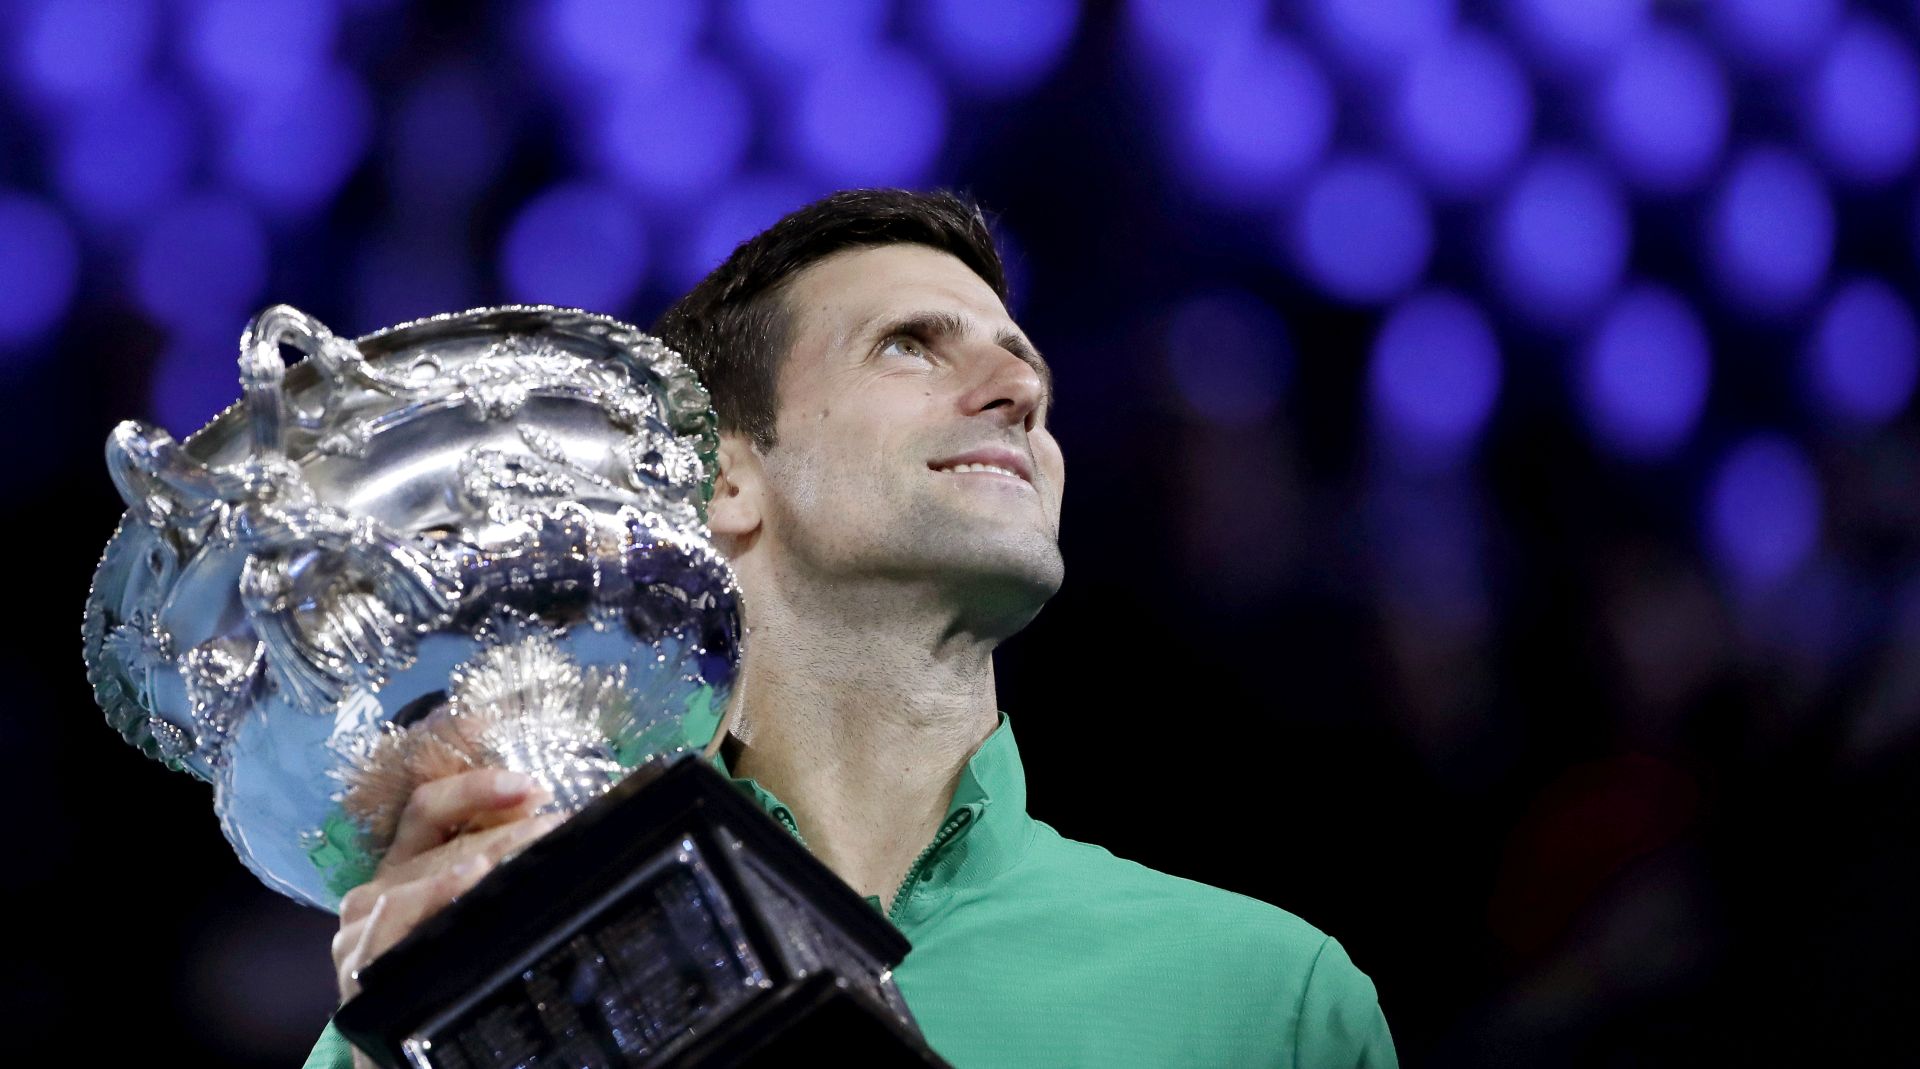 epa08187781 Novak Djokovic of Serbia poses for photos with the Norman Brookes Challenge Cup after winning his men's singles final match against Dominic Thiem of Austria at the Australian Open Grand Slam tennis tournament in Melbourne, Australia, 02 February 2020. EPA/FRANCIS MALASIG